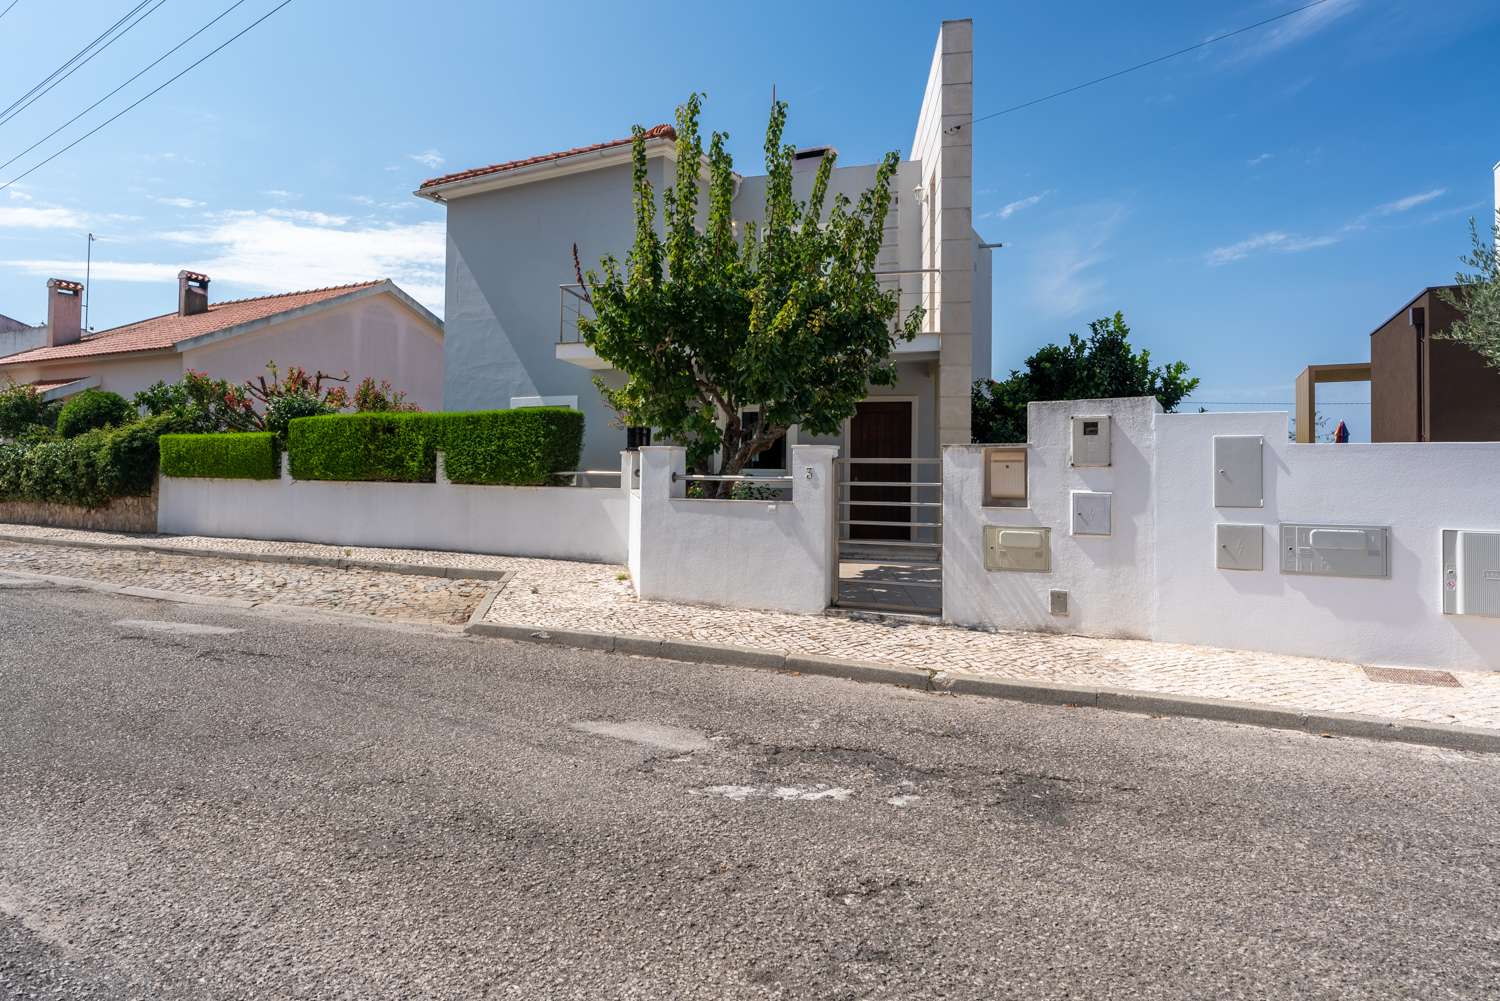 4-bedroom house with garden for sale in Mafra